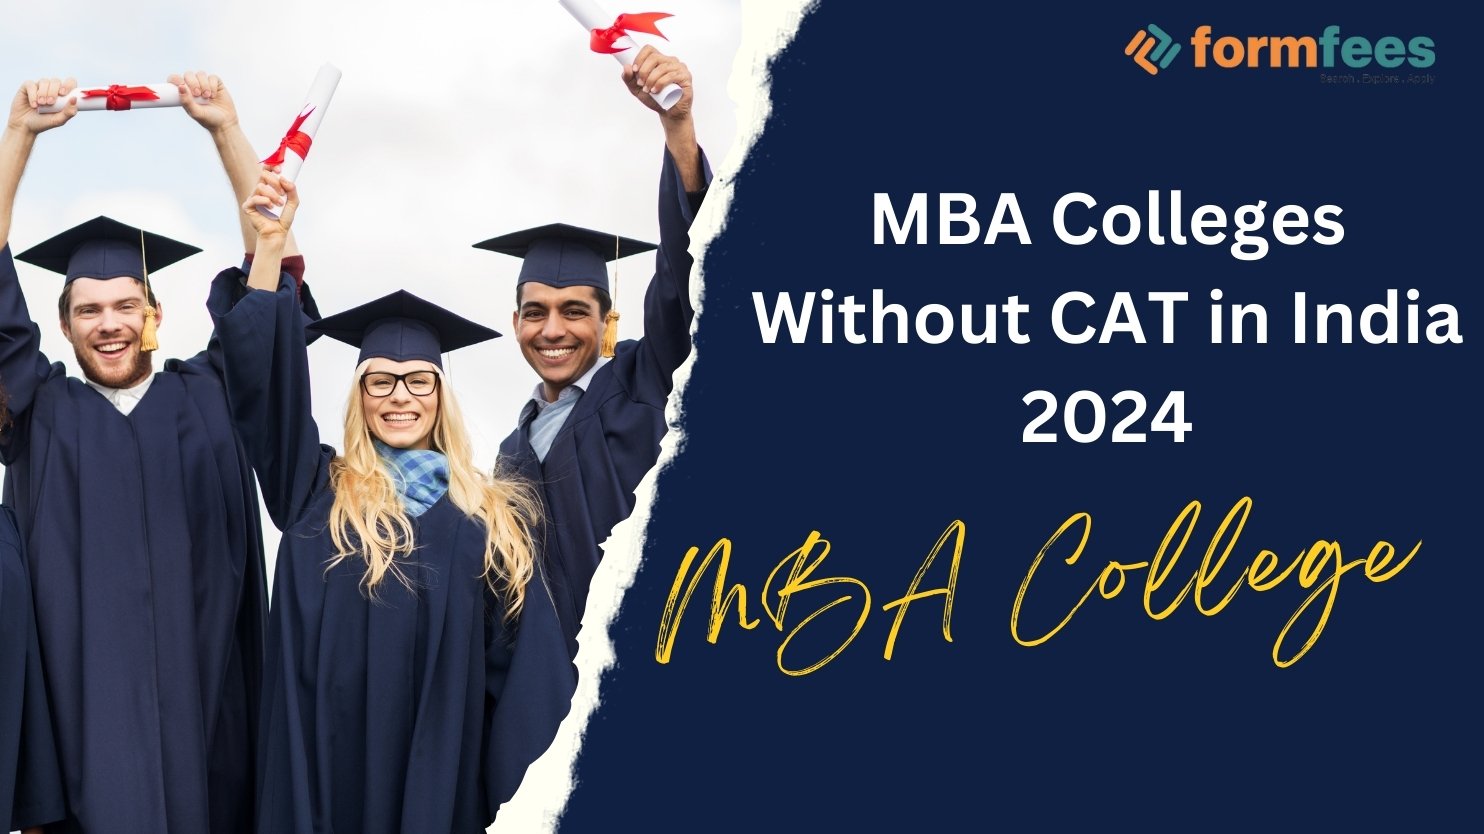 MBA Colleges Without CAT in India 2024